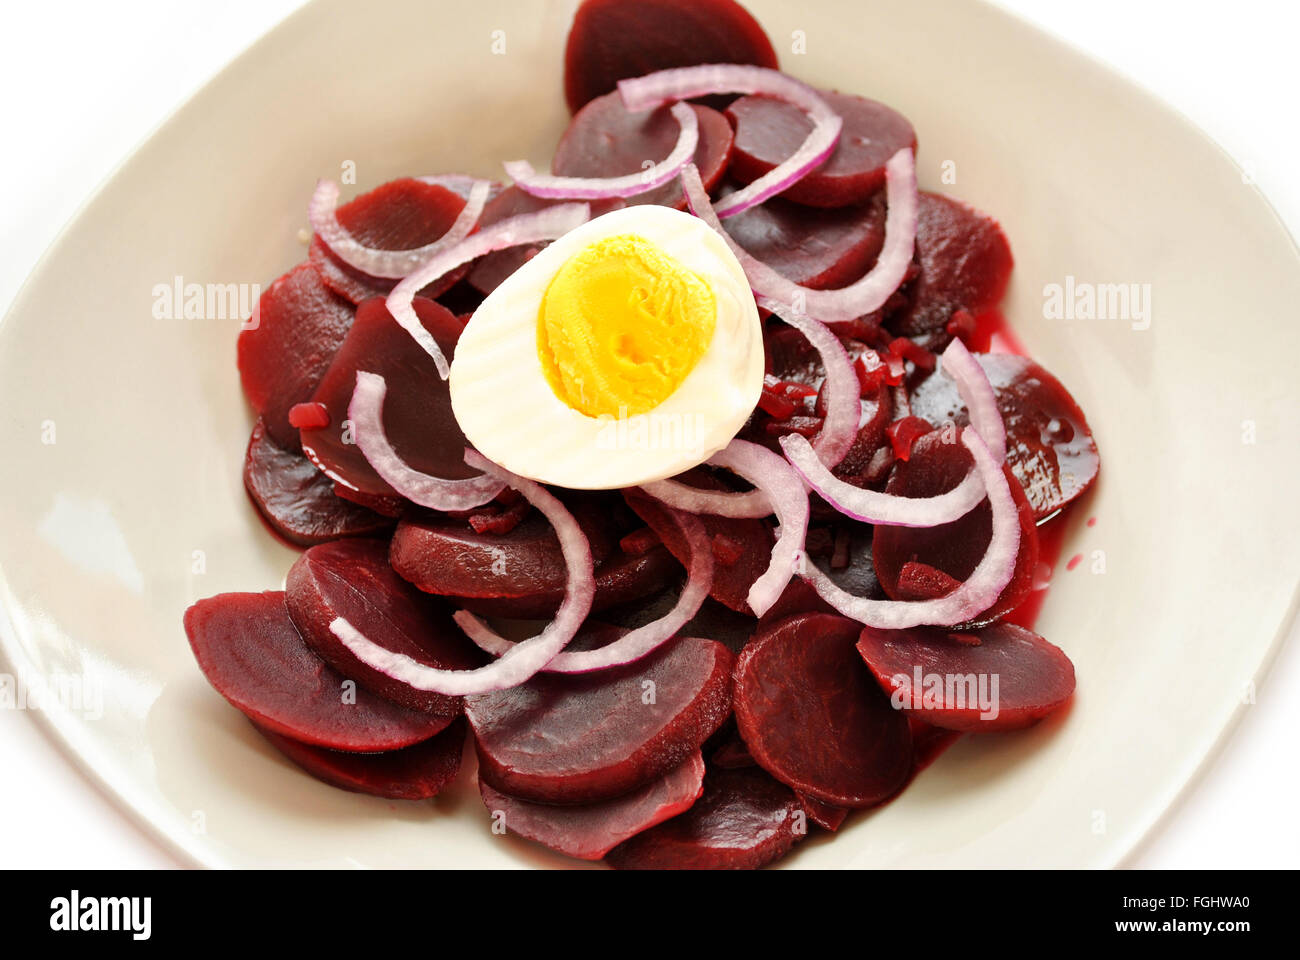 Beets, Onions and Boiled Egg Salad Served in a Bowl Stock Photo